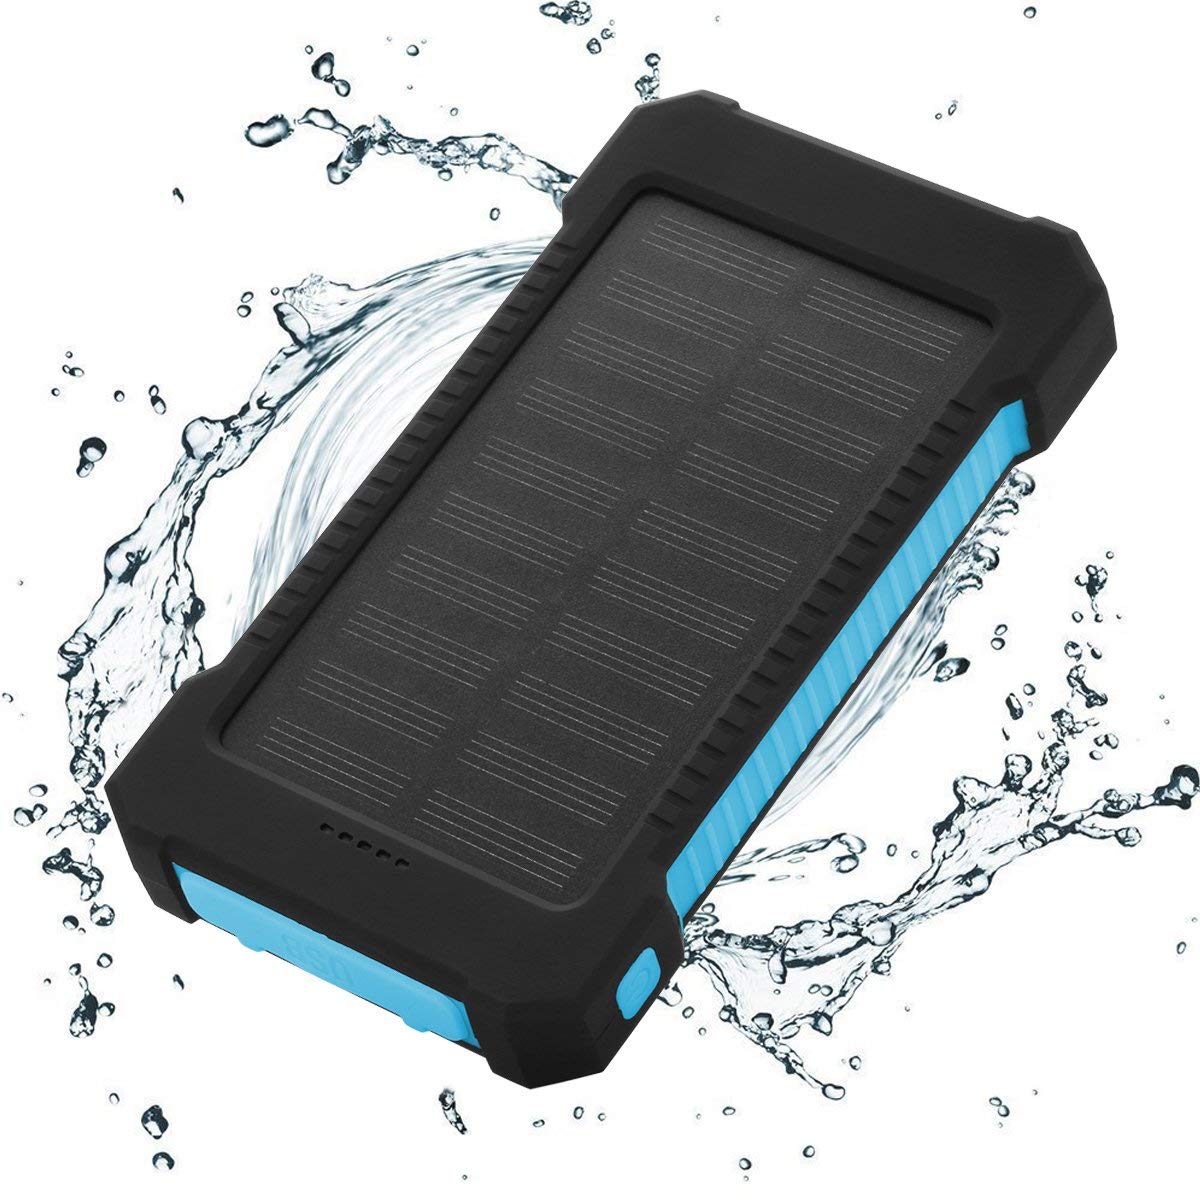 Solar Charger Power Bank 10,000mAh - FLOUREON Portable Phone Solar Charger Dual USB 1.0A/2.1A Max IP67 Waterproof LED SOS Flashlight External Battery for iPhone, iPad, Samsung Galaxy and Android Phone